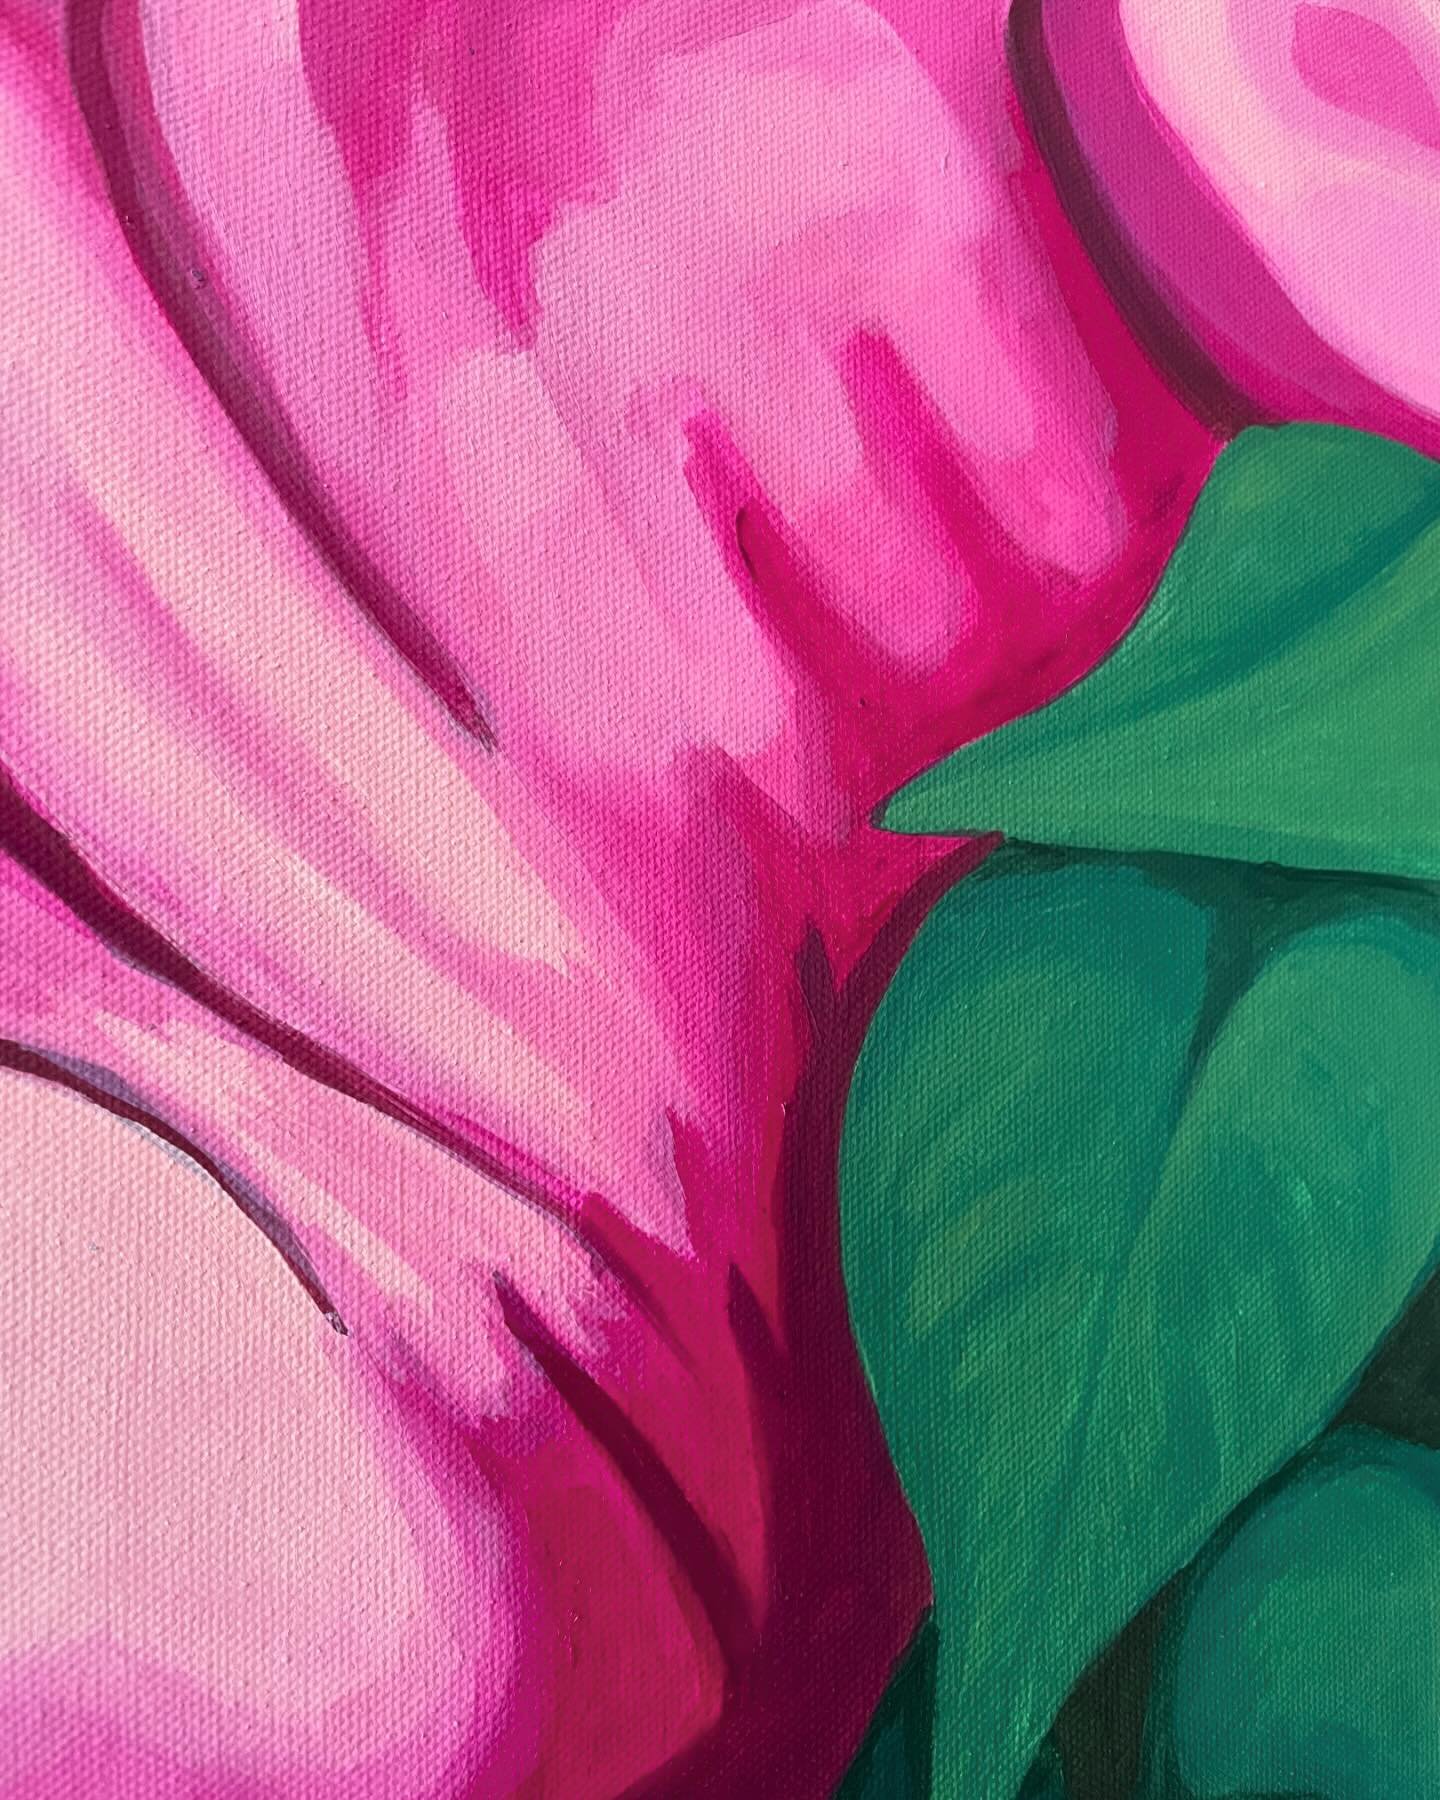 Soft folds and foliage&hellip; detail shot of this piece in progress. It&rsquo;s slow going but I&rsquo;m loving the contrasting colors, duh, I use them a lot. The heart wants what the heart wants 💖

#haleynevilleart #newenglandartist #figurativeart